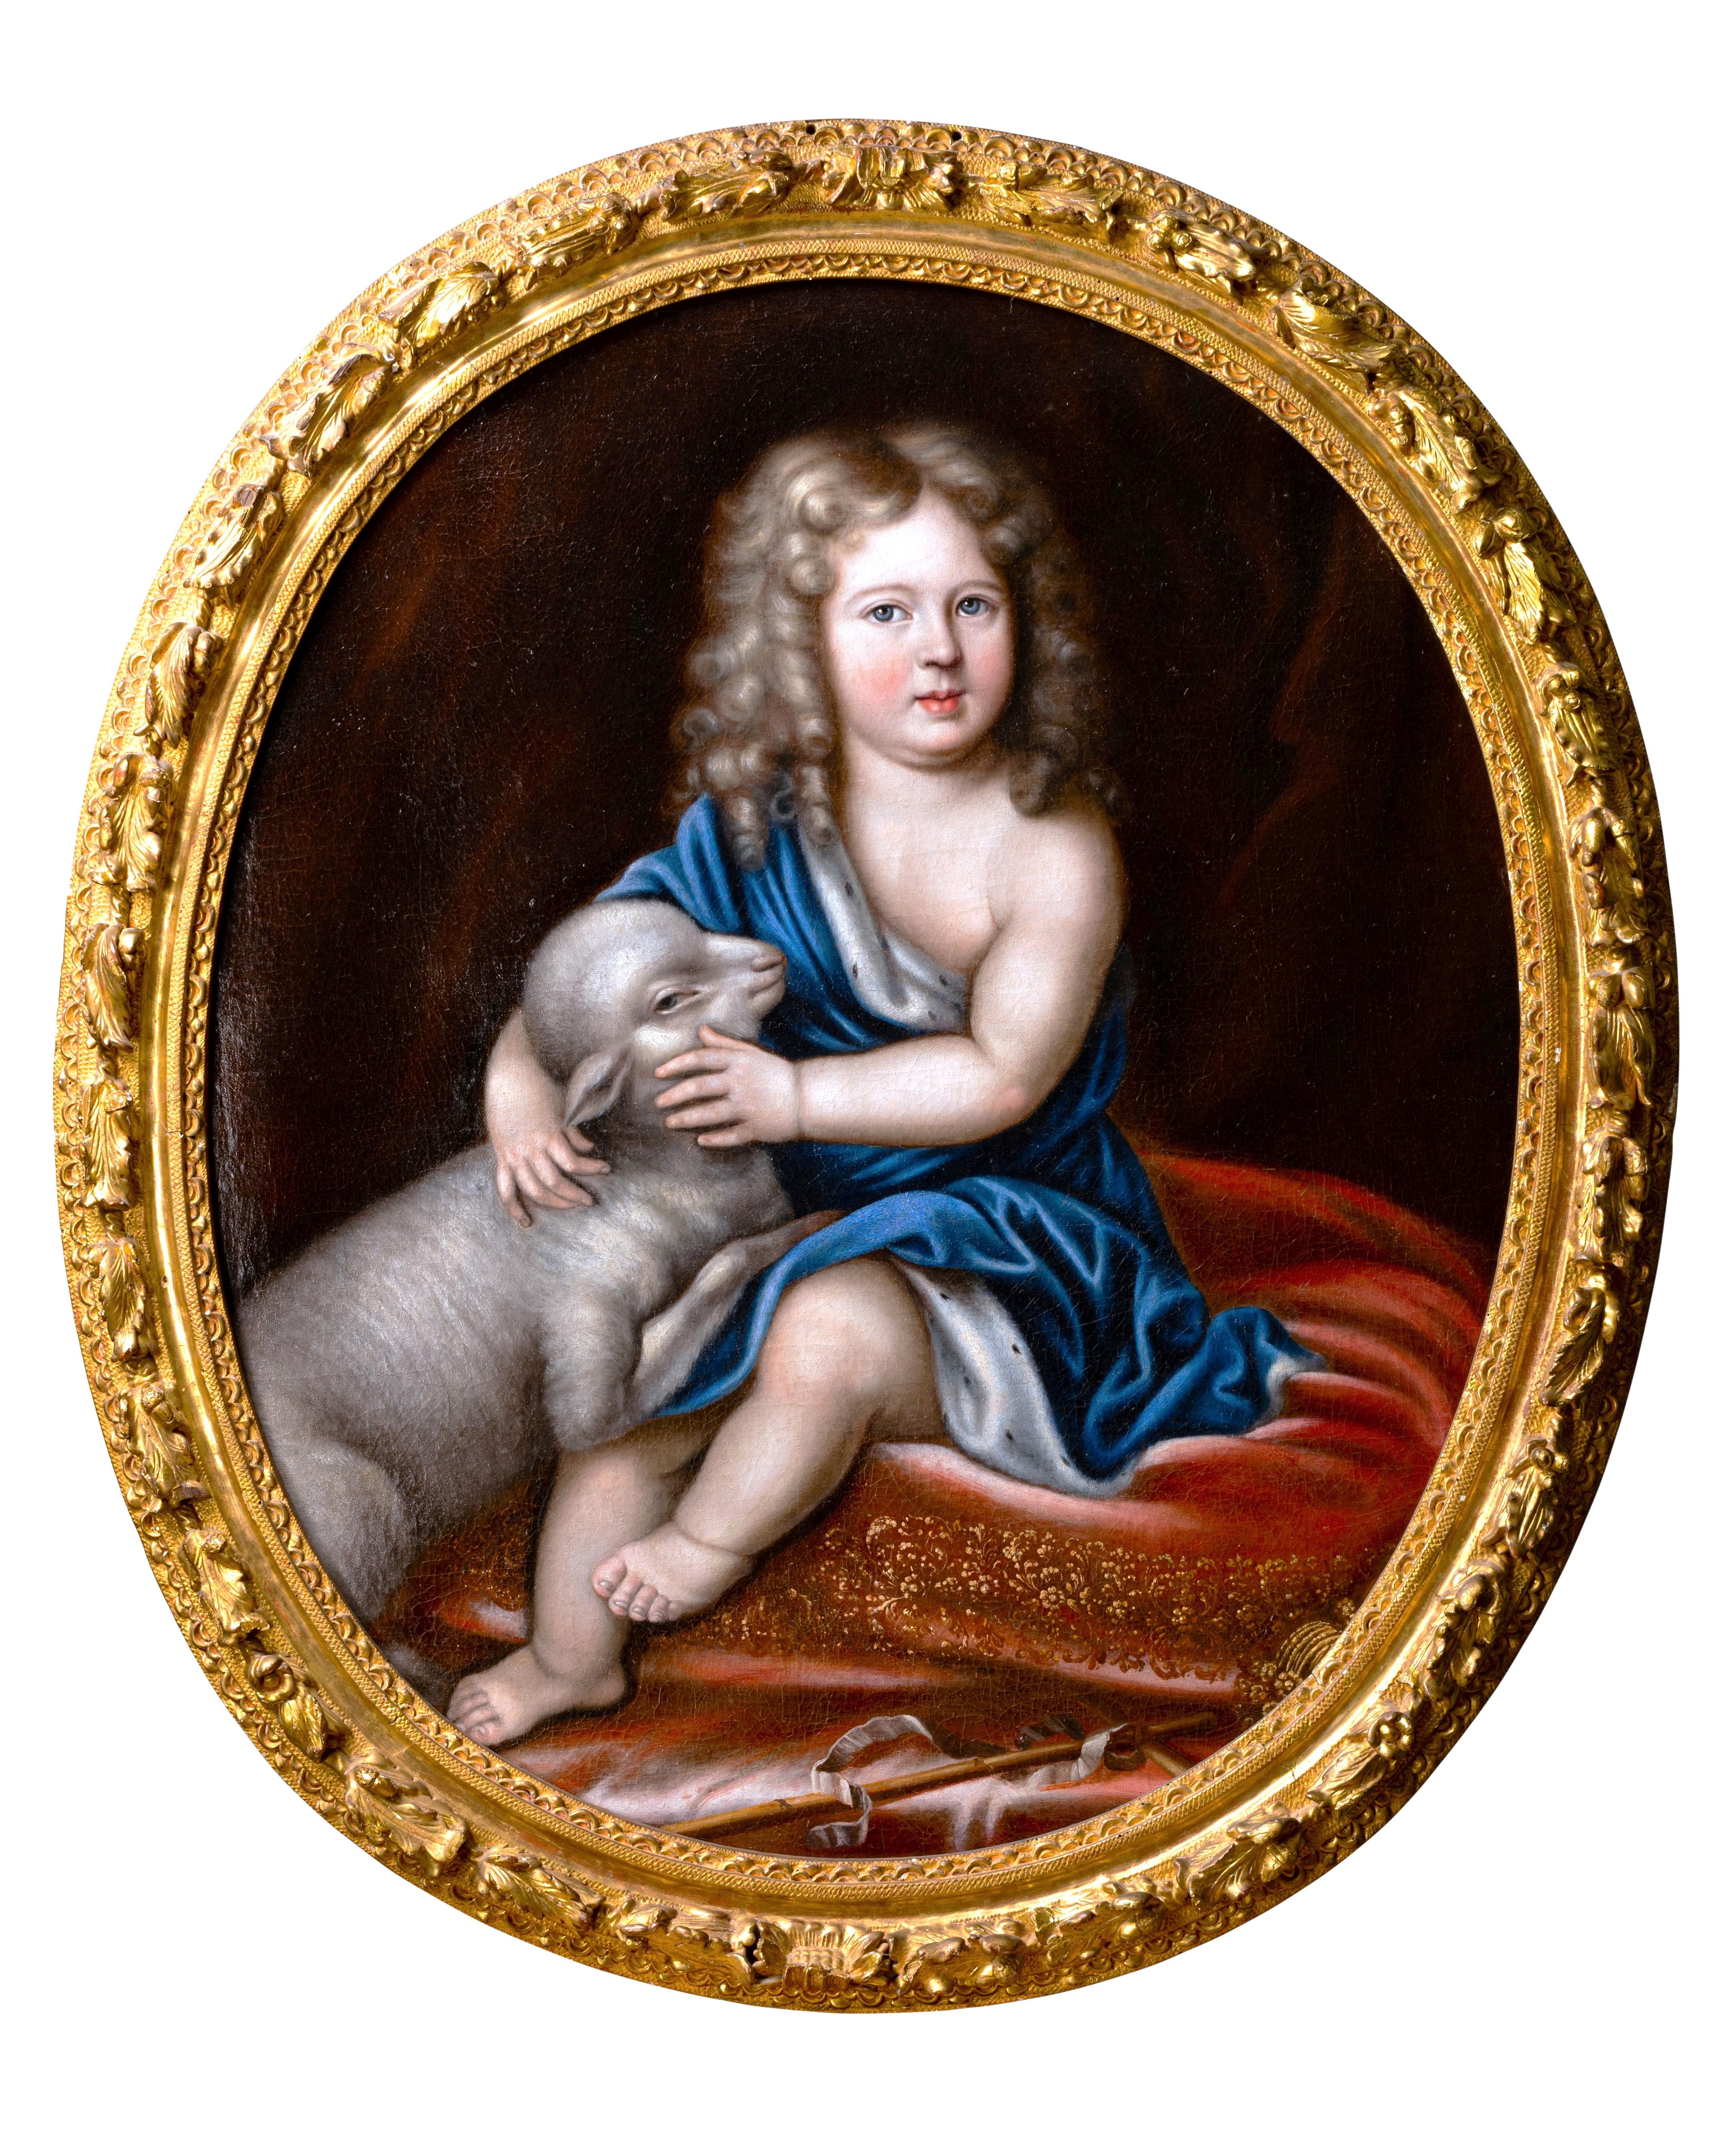 This very charming portrait depicts Philippe V as a child (Duke of Anjou, grandson of Louis XIV and future king of Spain) as Saint John the Baptist.
Installed on a red velvet cushion embroidered with gold, the little boy tenderly embraces a lamb,